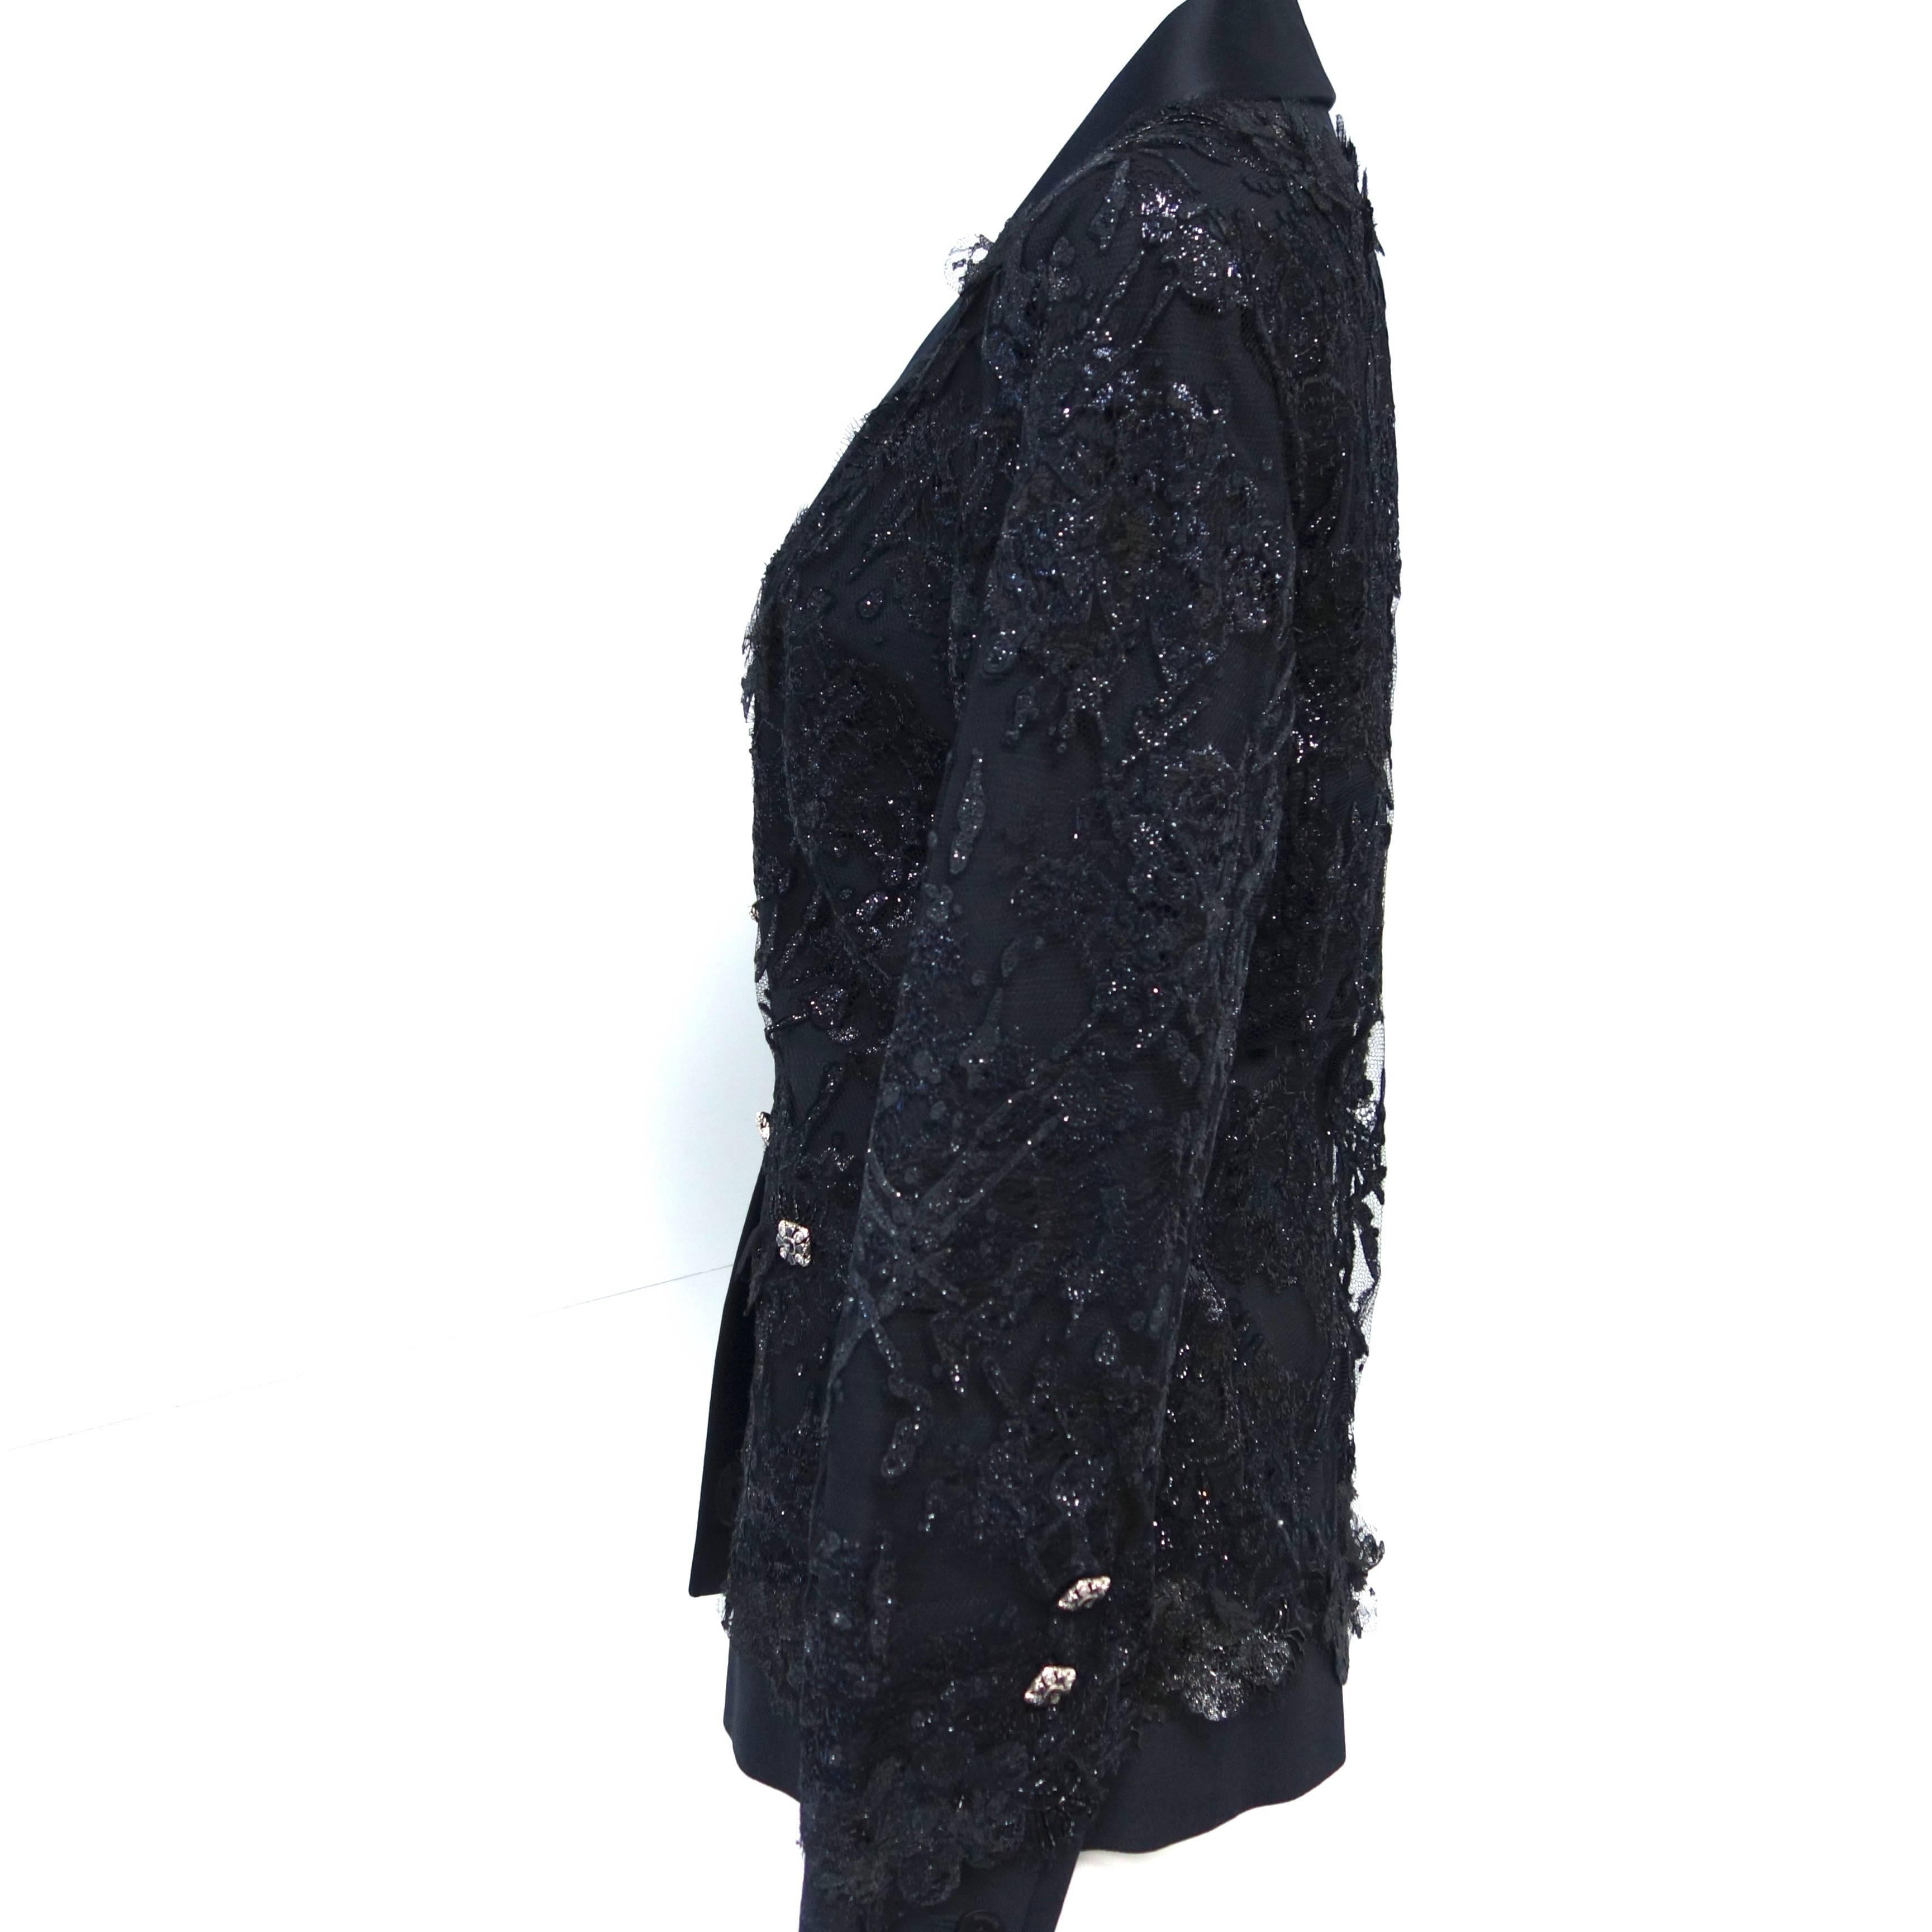 Chanel 2011 fall runway collection black silk satin and Lesage lace jacket. Tagged size FR 40. 
Measurements: 
35